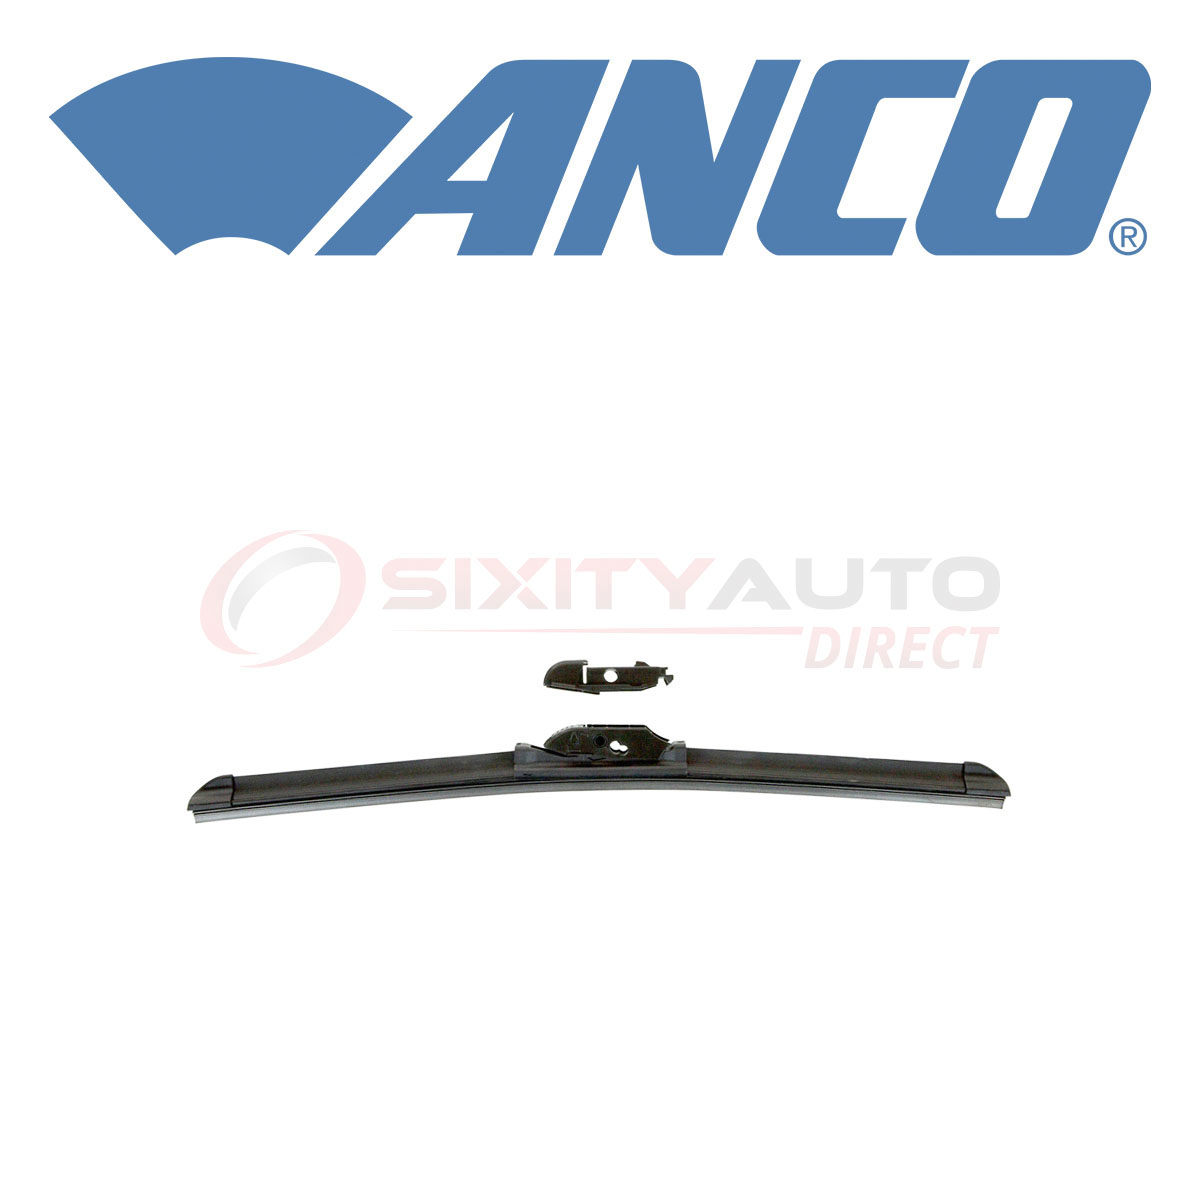 ANCO Profile Windshield Wiper Blade for 2016 Lexus RX350 3.5L V6 - Bracketed lz | eBay 2016 Lexus Rx 350 Wiper Blade Replacement